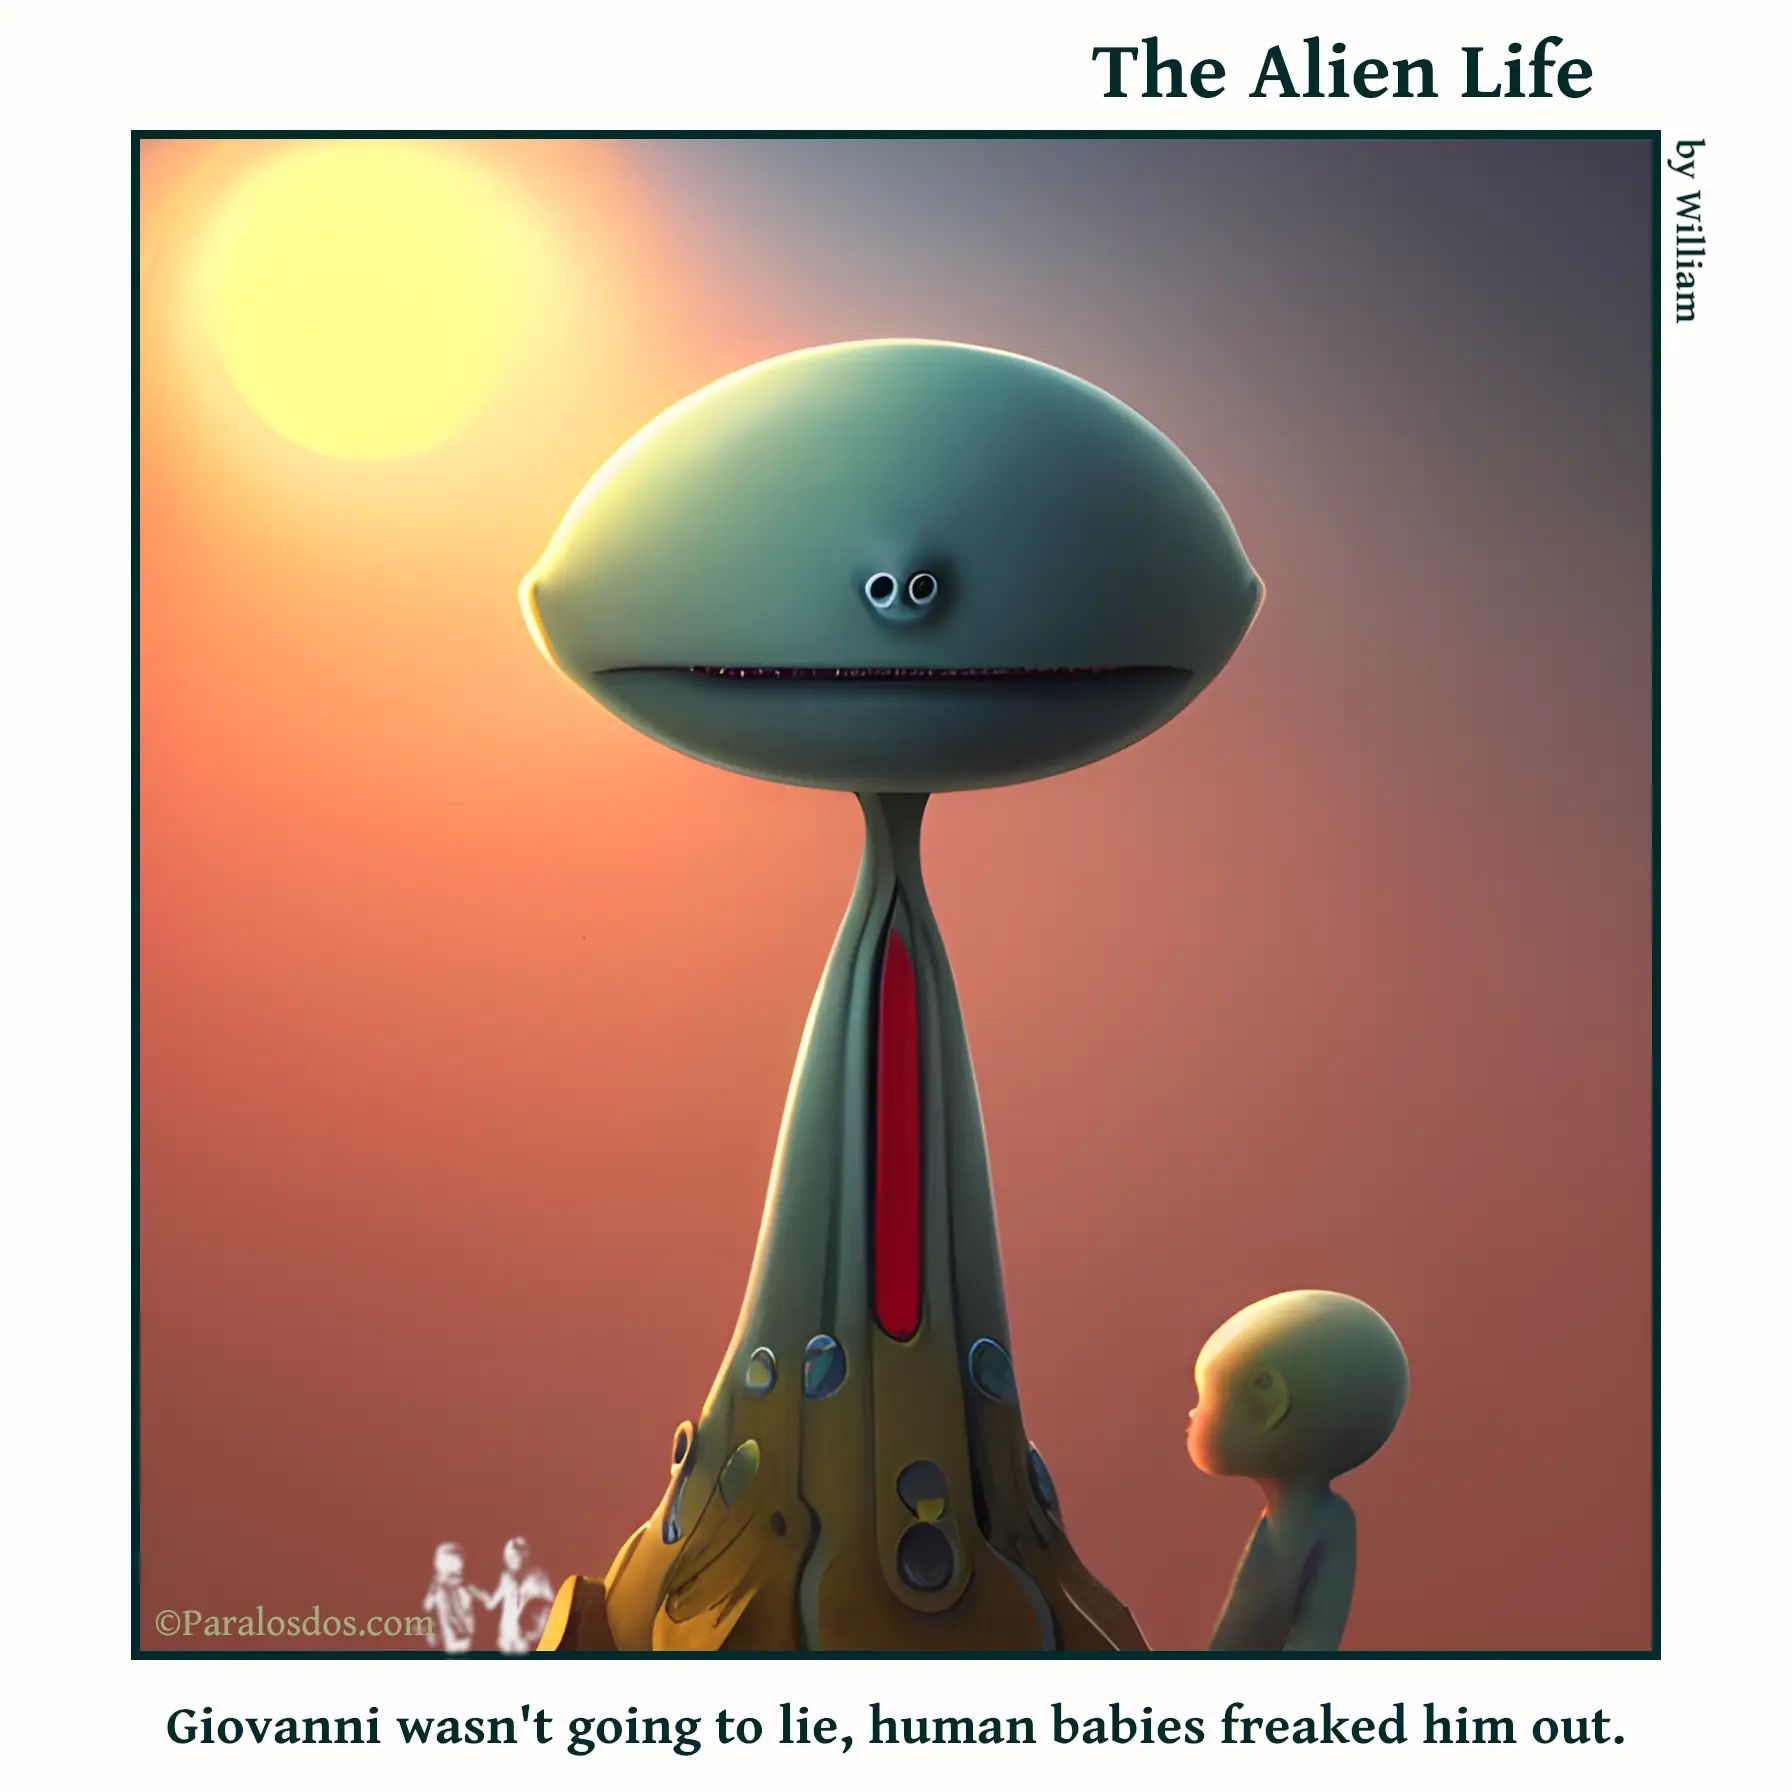 The Alien Life, one panel Comic. An odd looking alien is watching a human baby. The alien is making a goofy face. The caption reads: Giovanni wasn't going to lie, human babies freaked him out.